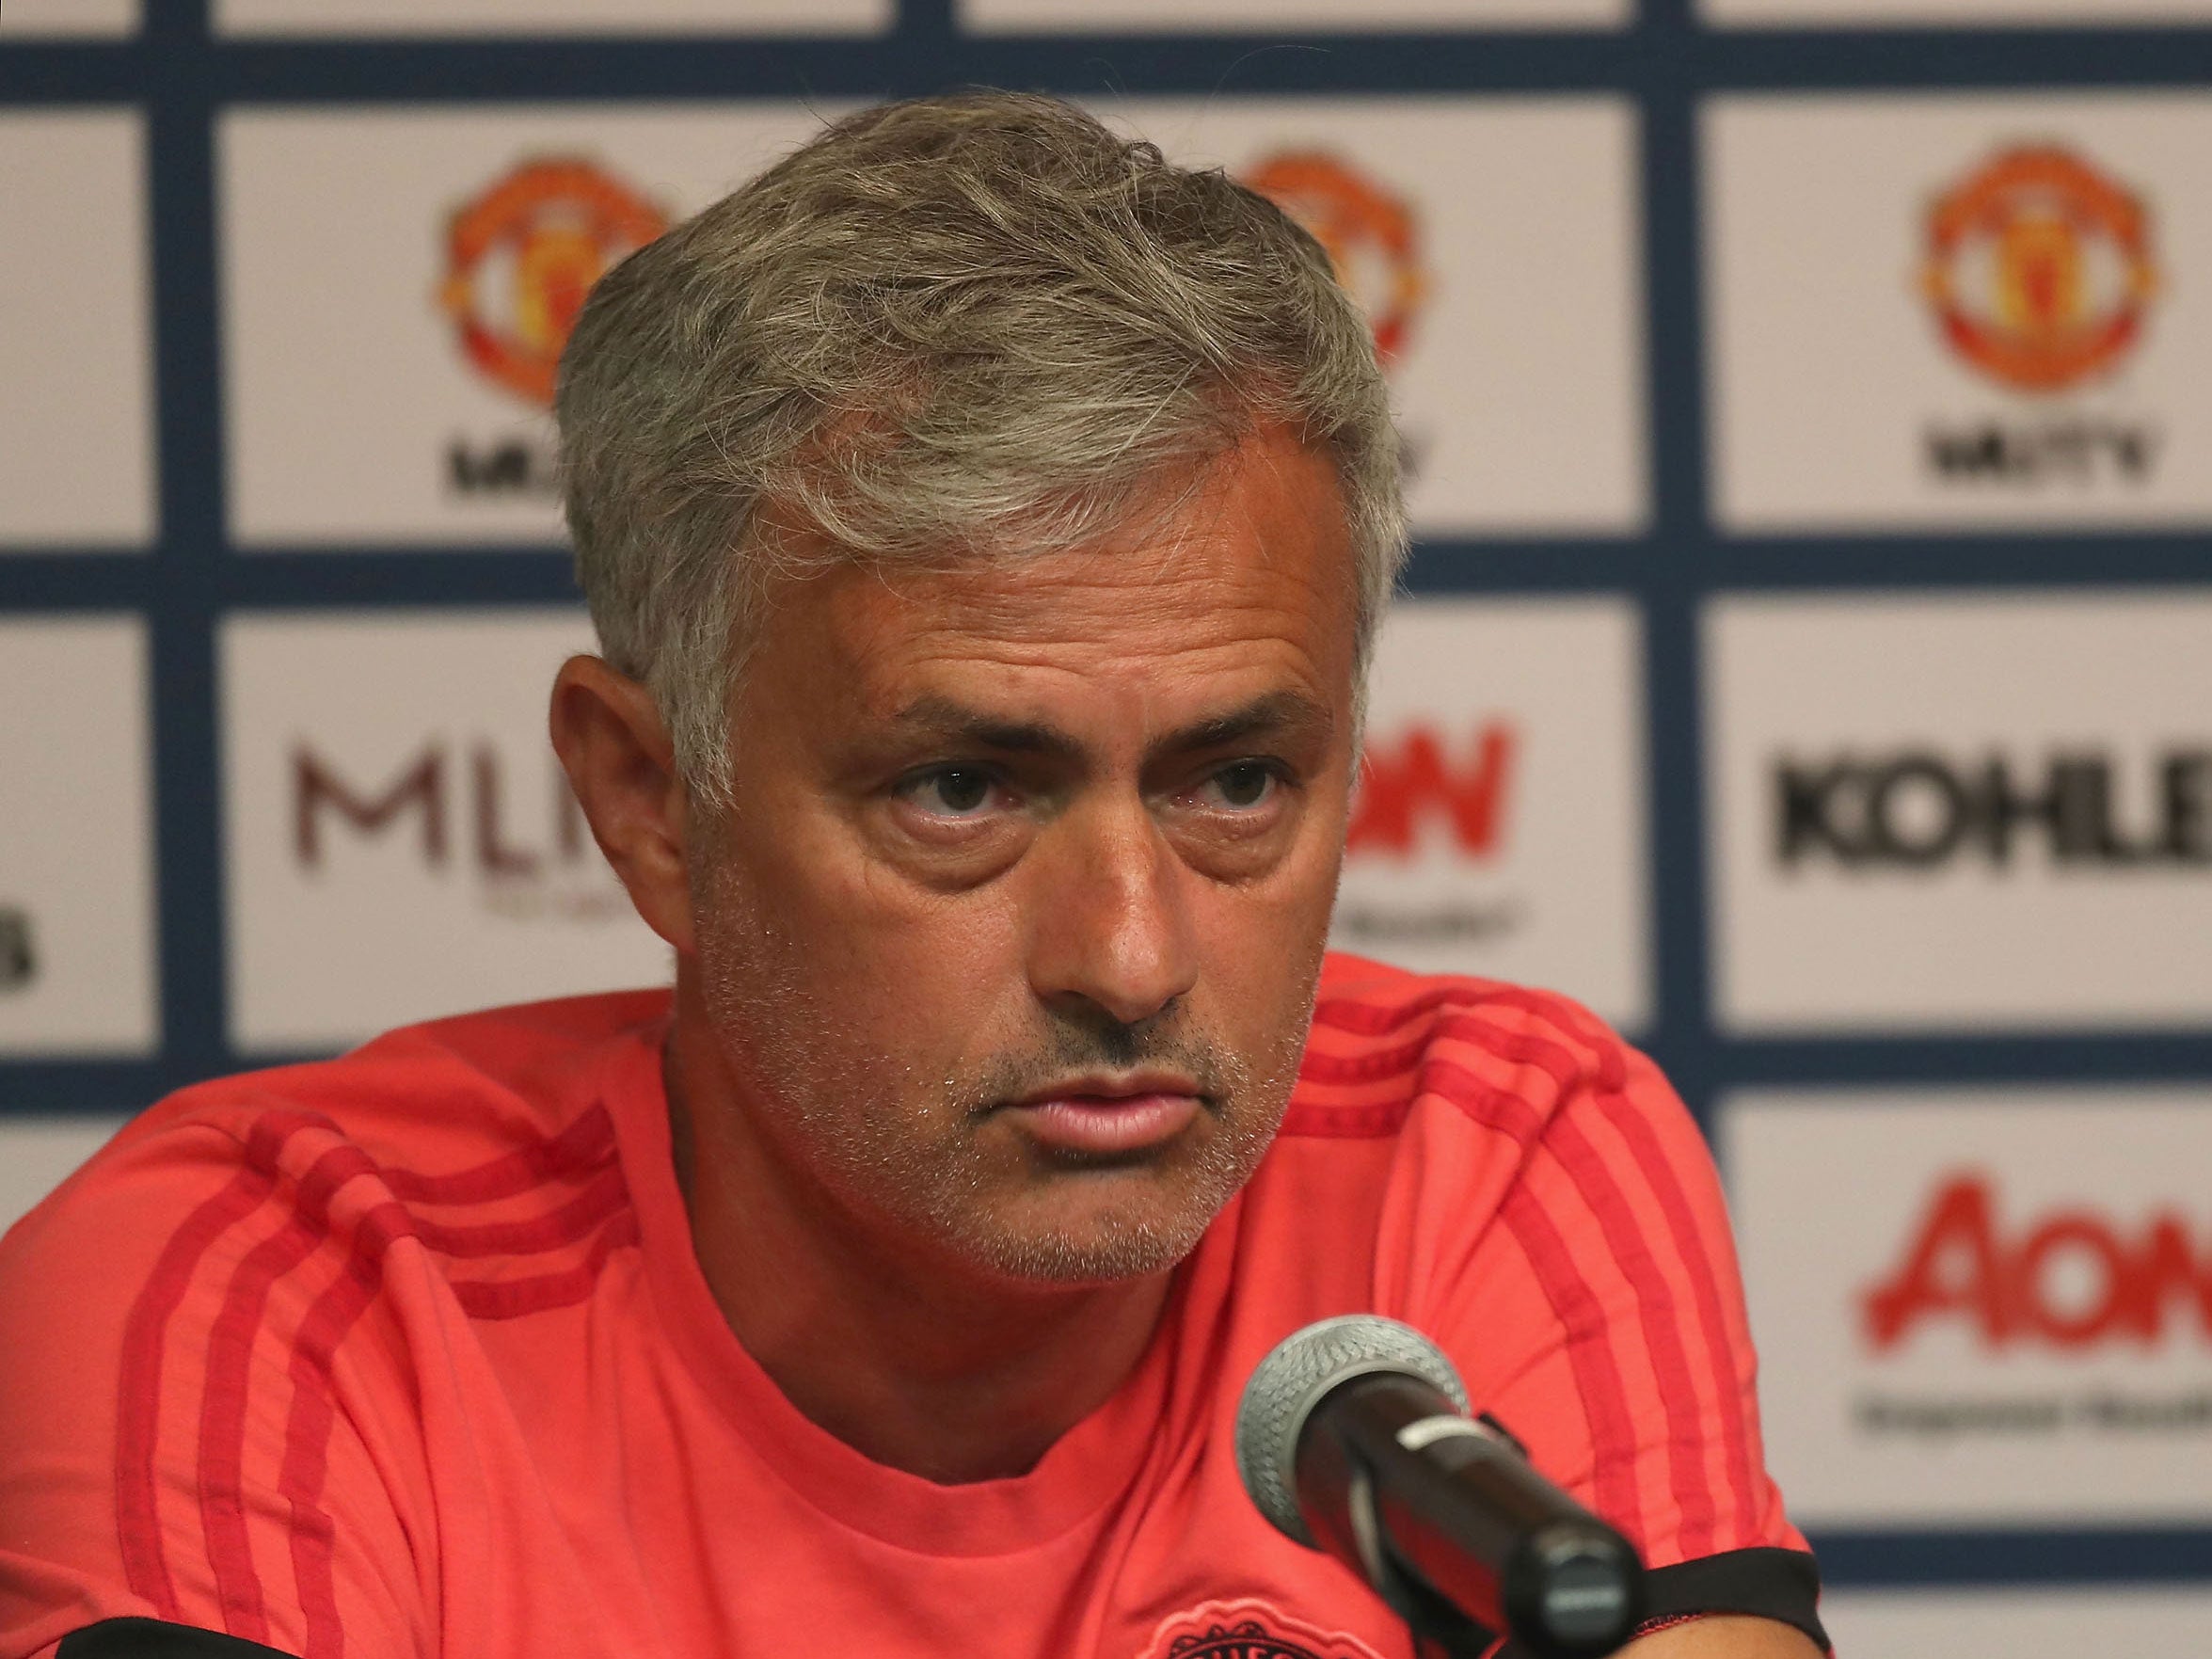 Jose Mourinho refuses to comment on Manchester United&apos;s title chances